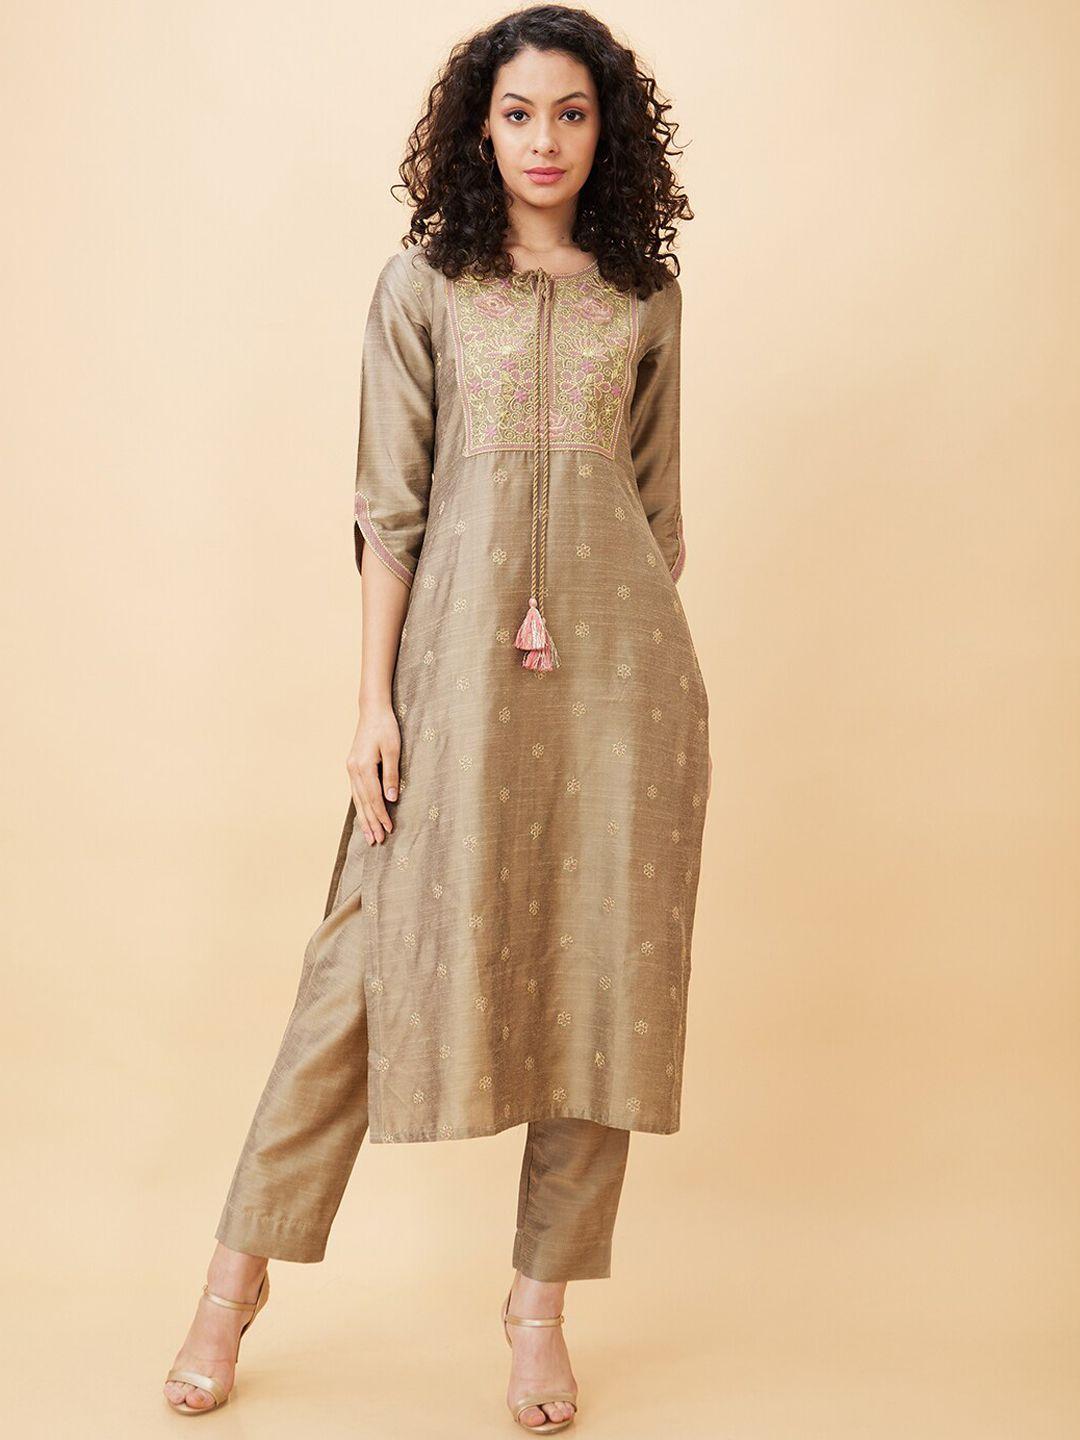 globus floral thread work kurta with trousers